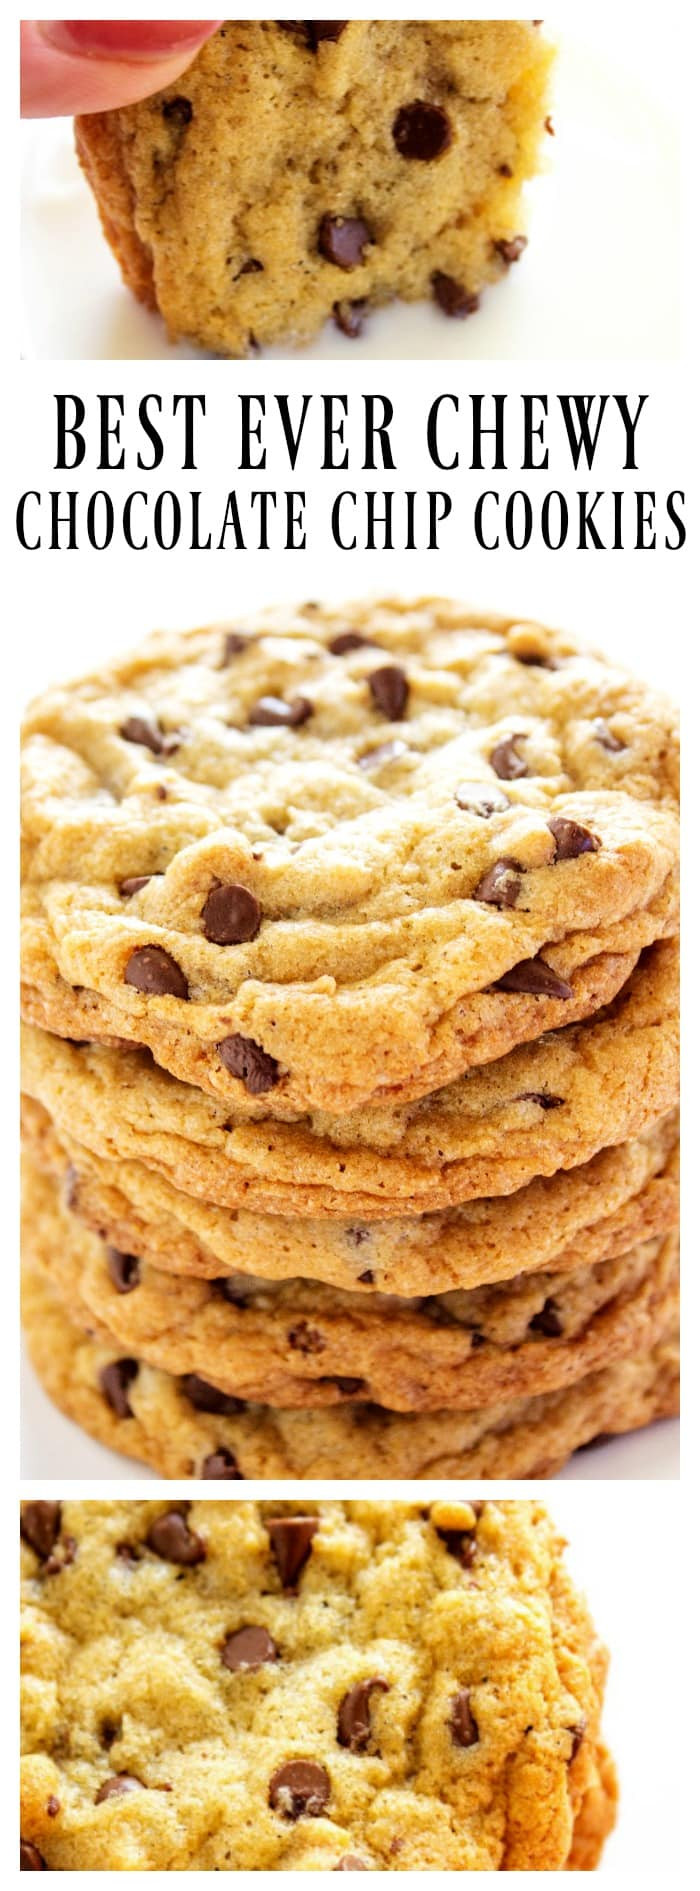 World'S Best Chocolate Chip Cookies
 Best Ever Chewy Chocolate Chip Cookies A Dash of Sanity